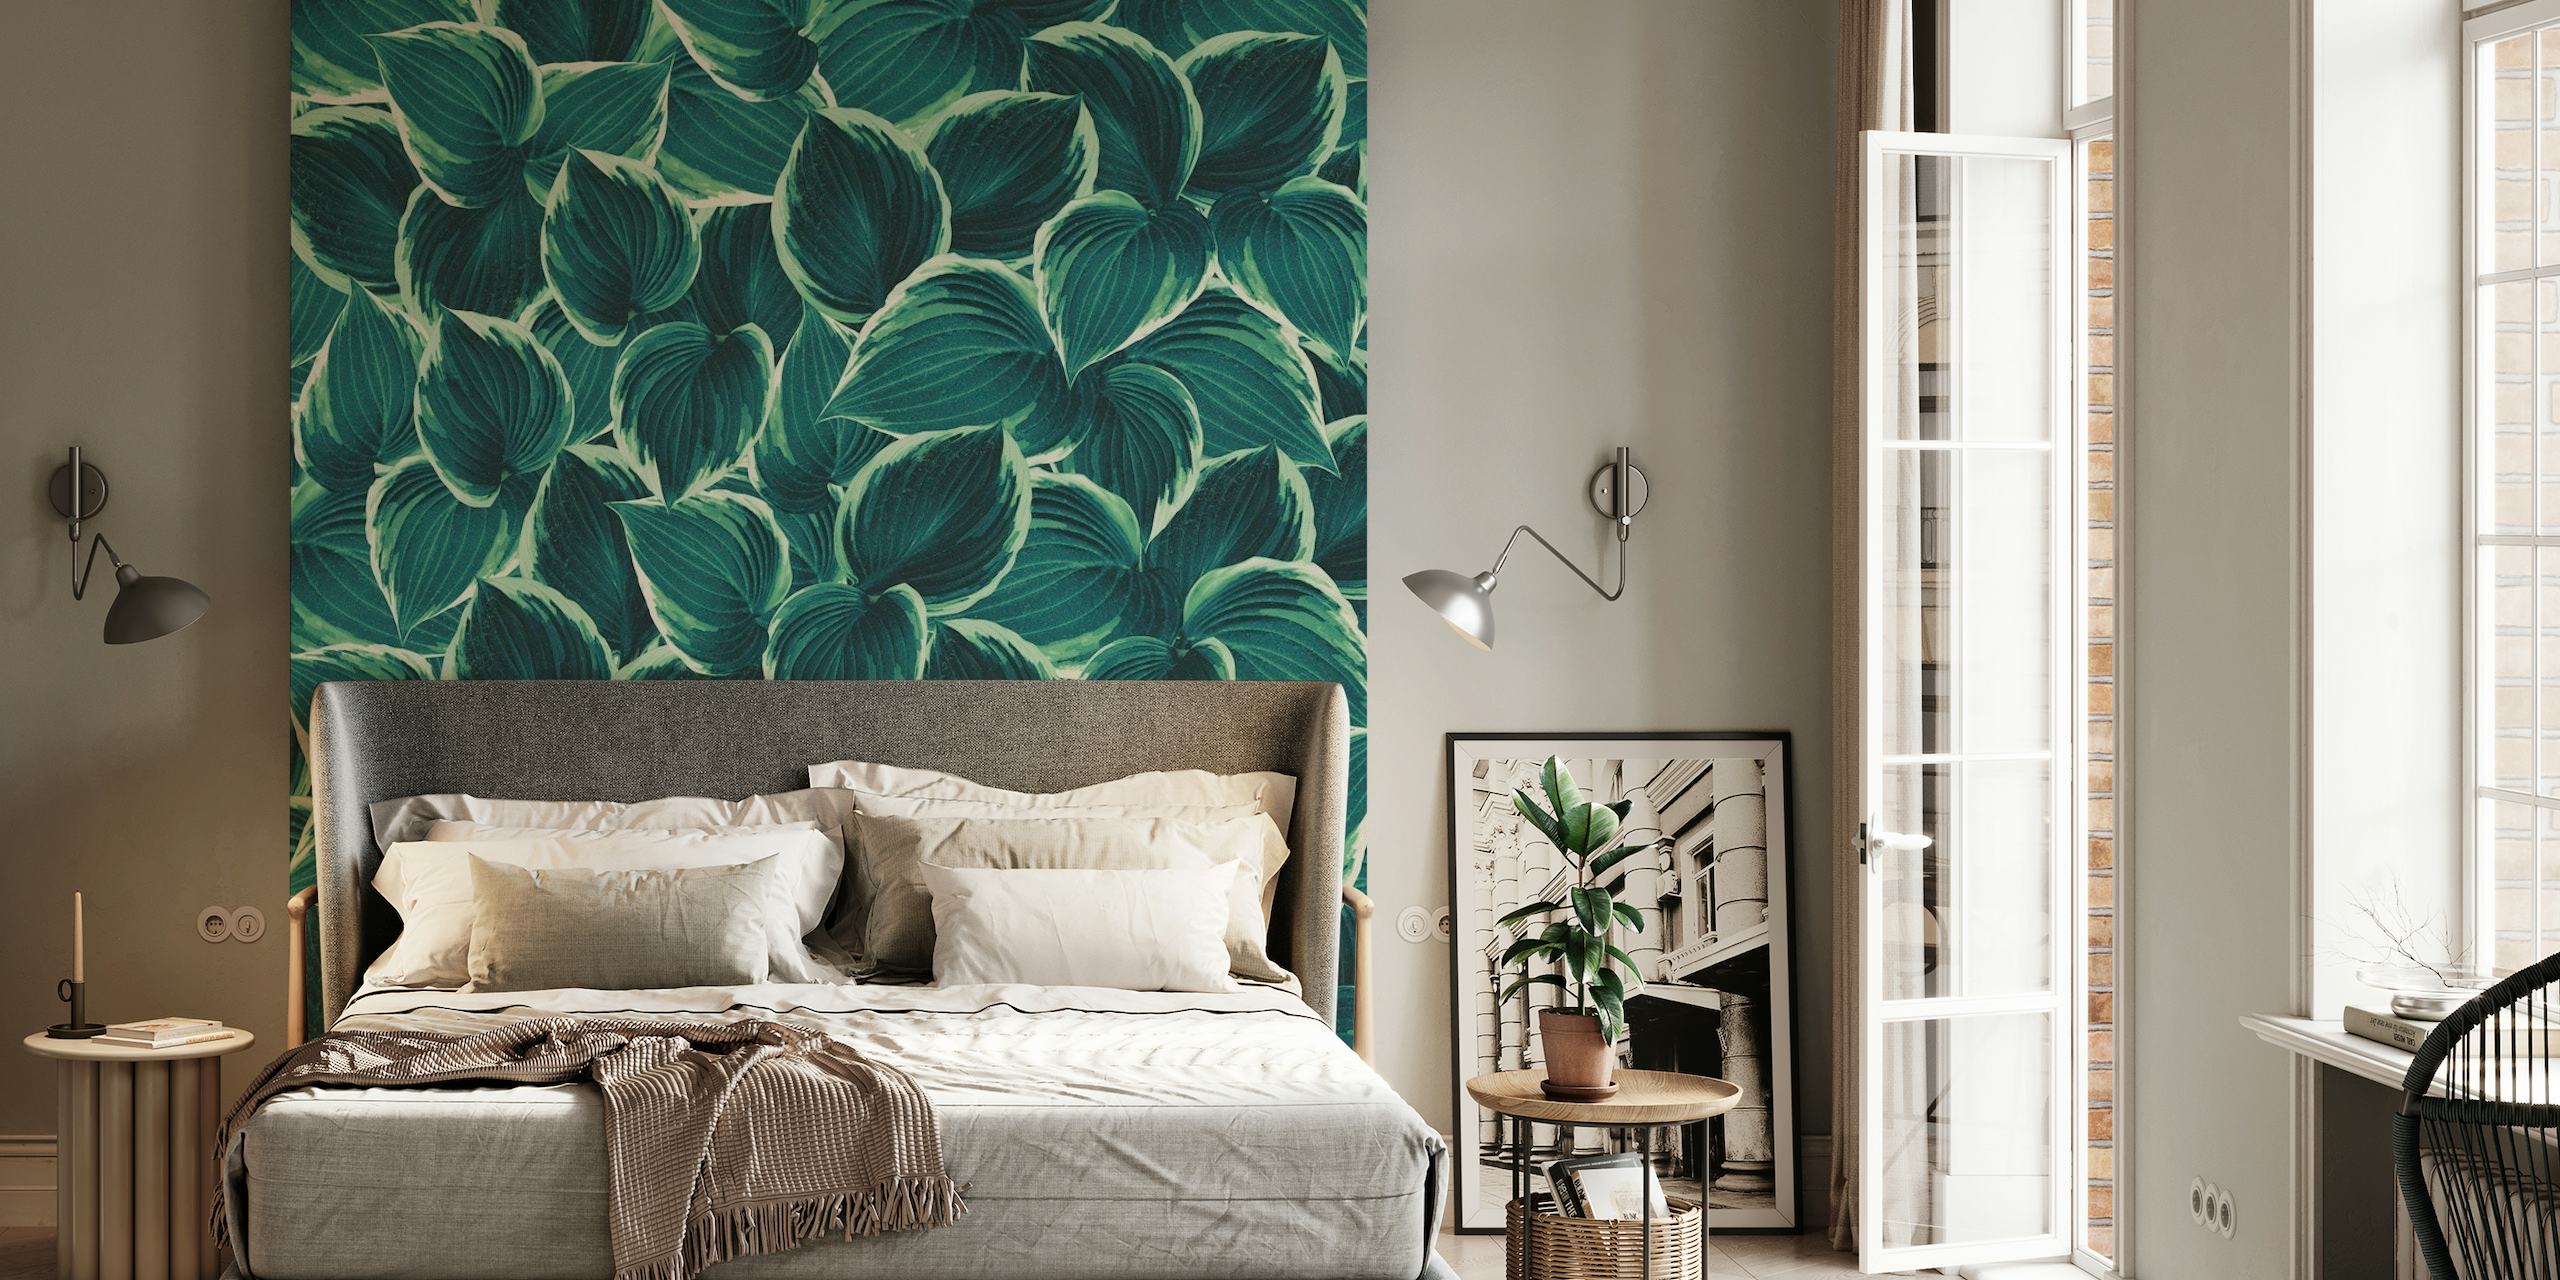 Green leaves wall mural for interior decoration